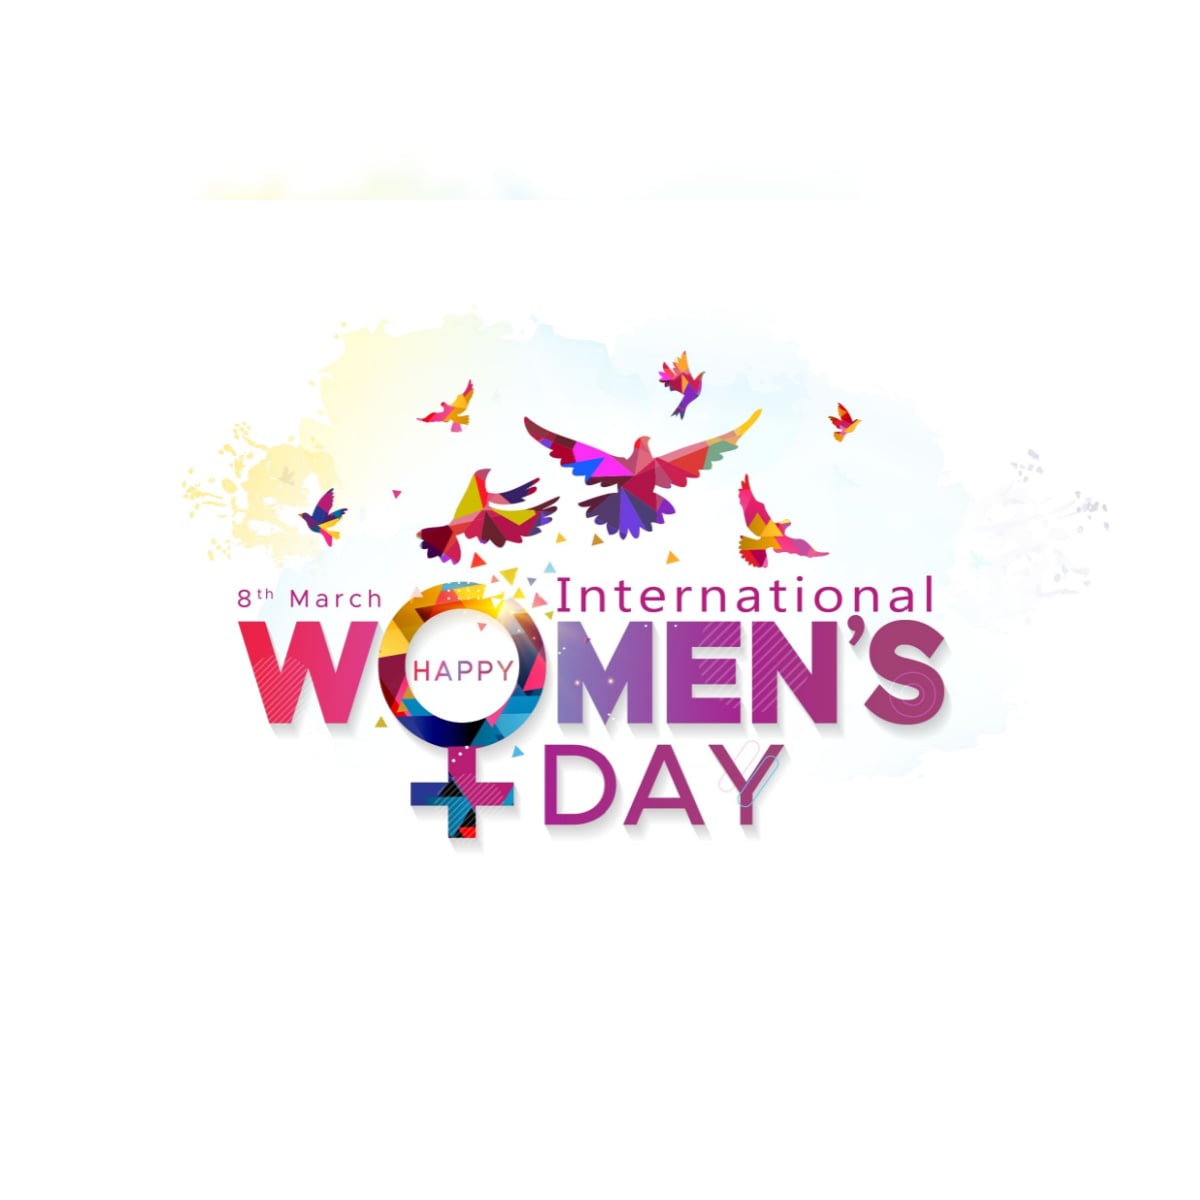 To all the woman of the world